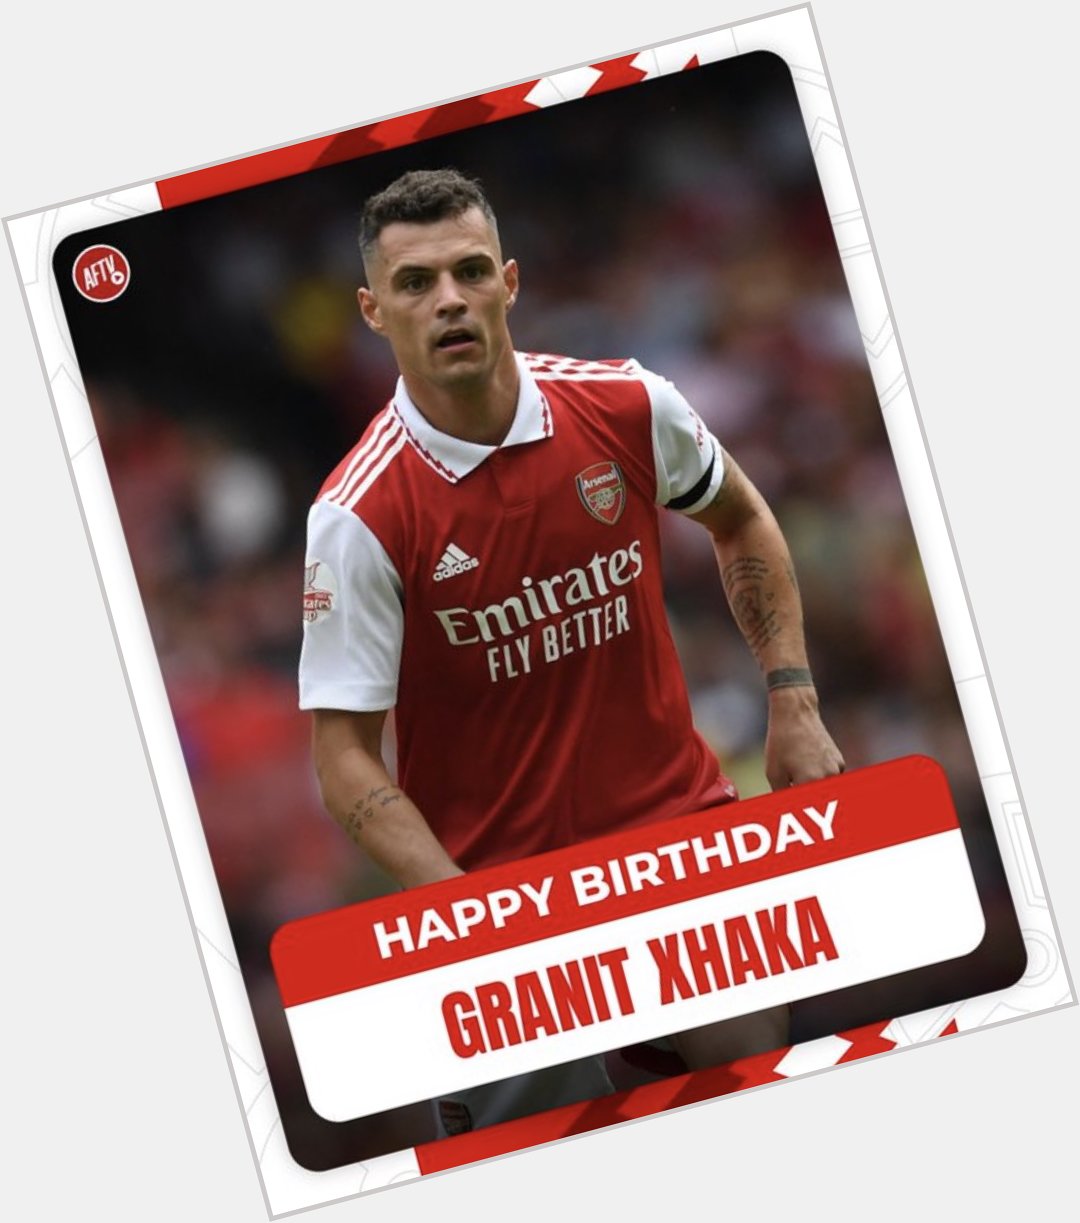 Happy Birthday General. Granit Xhaka. More better days to come. Have an amazing year El Captain 